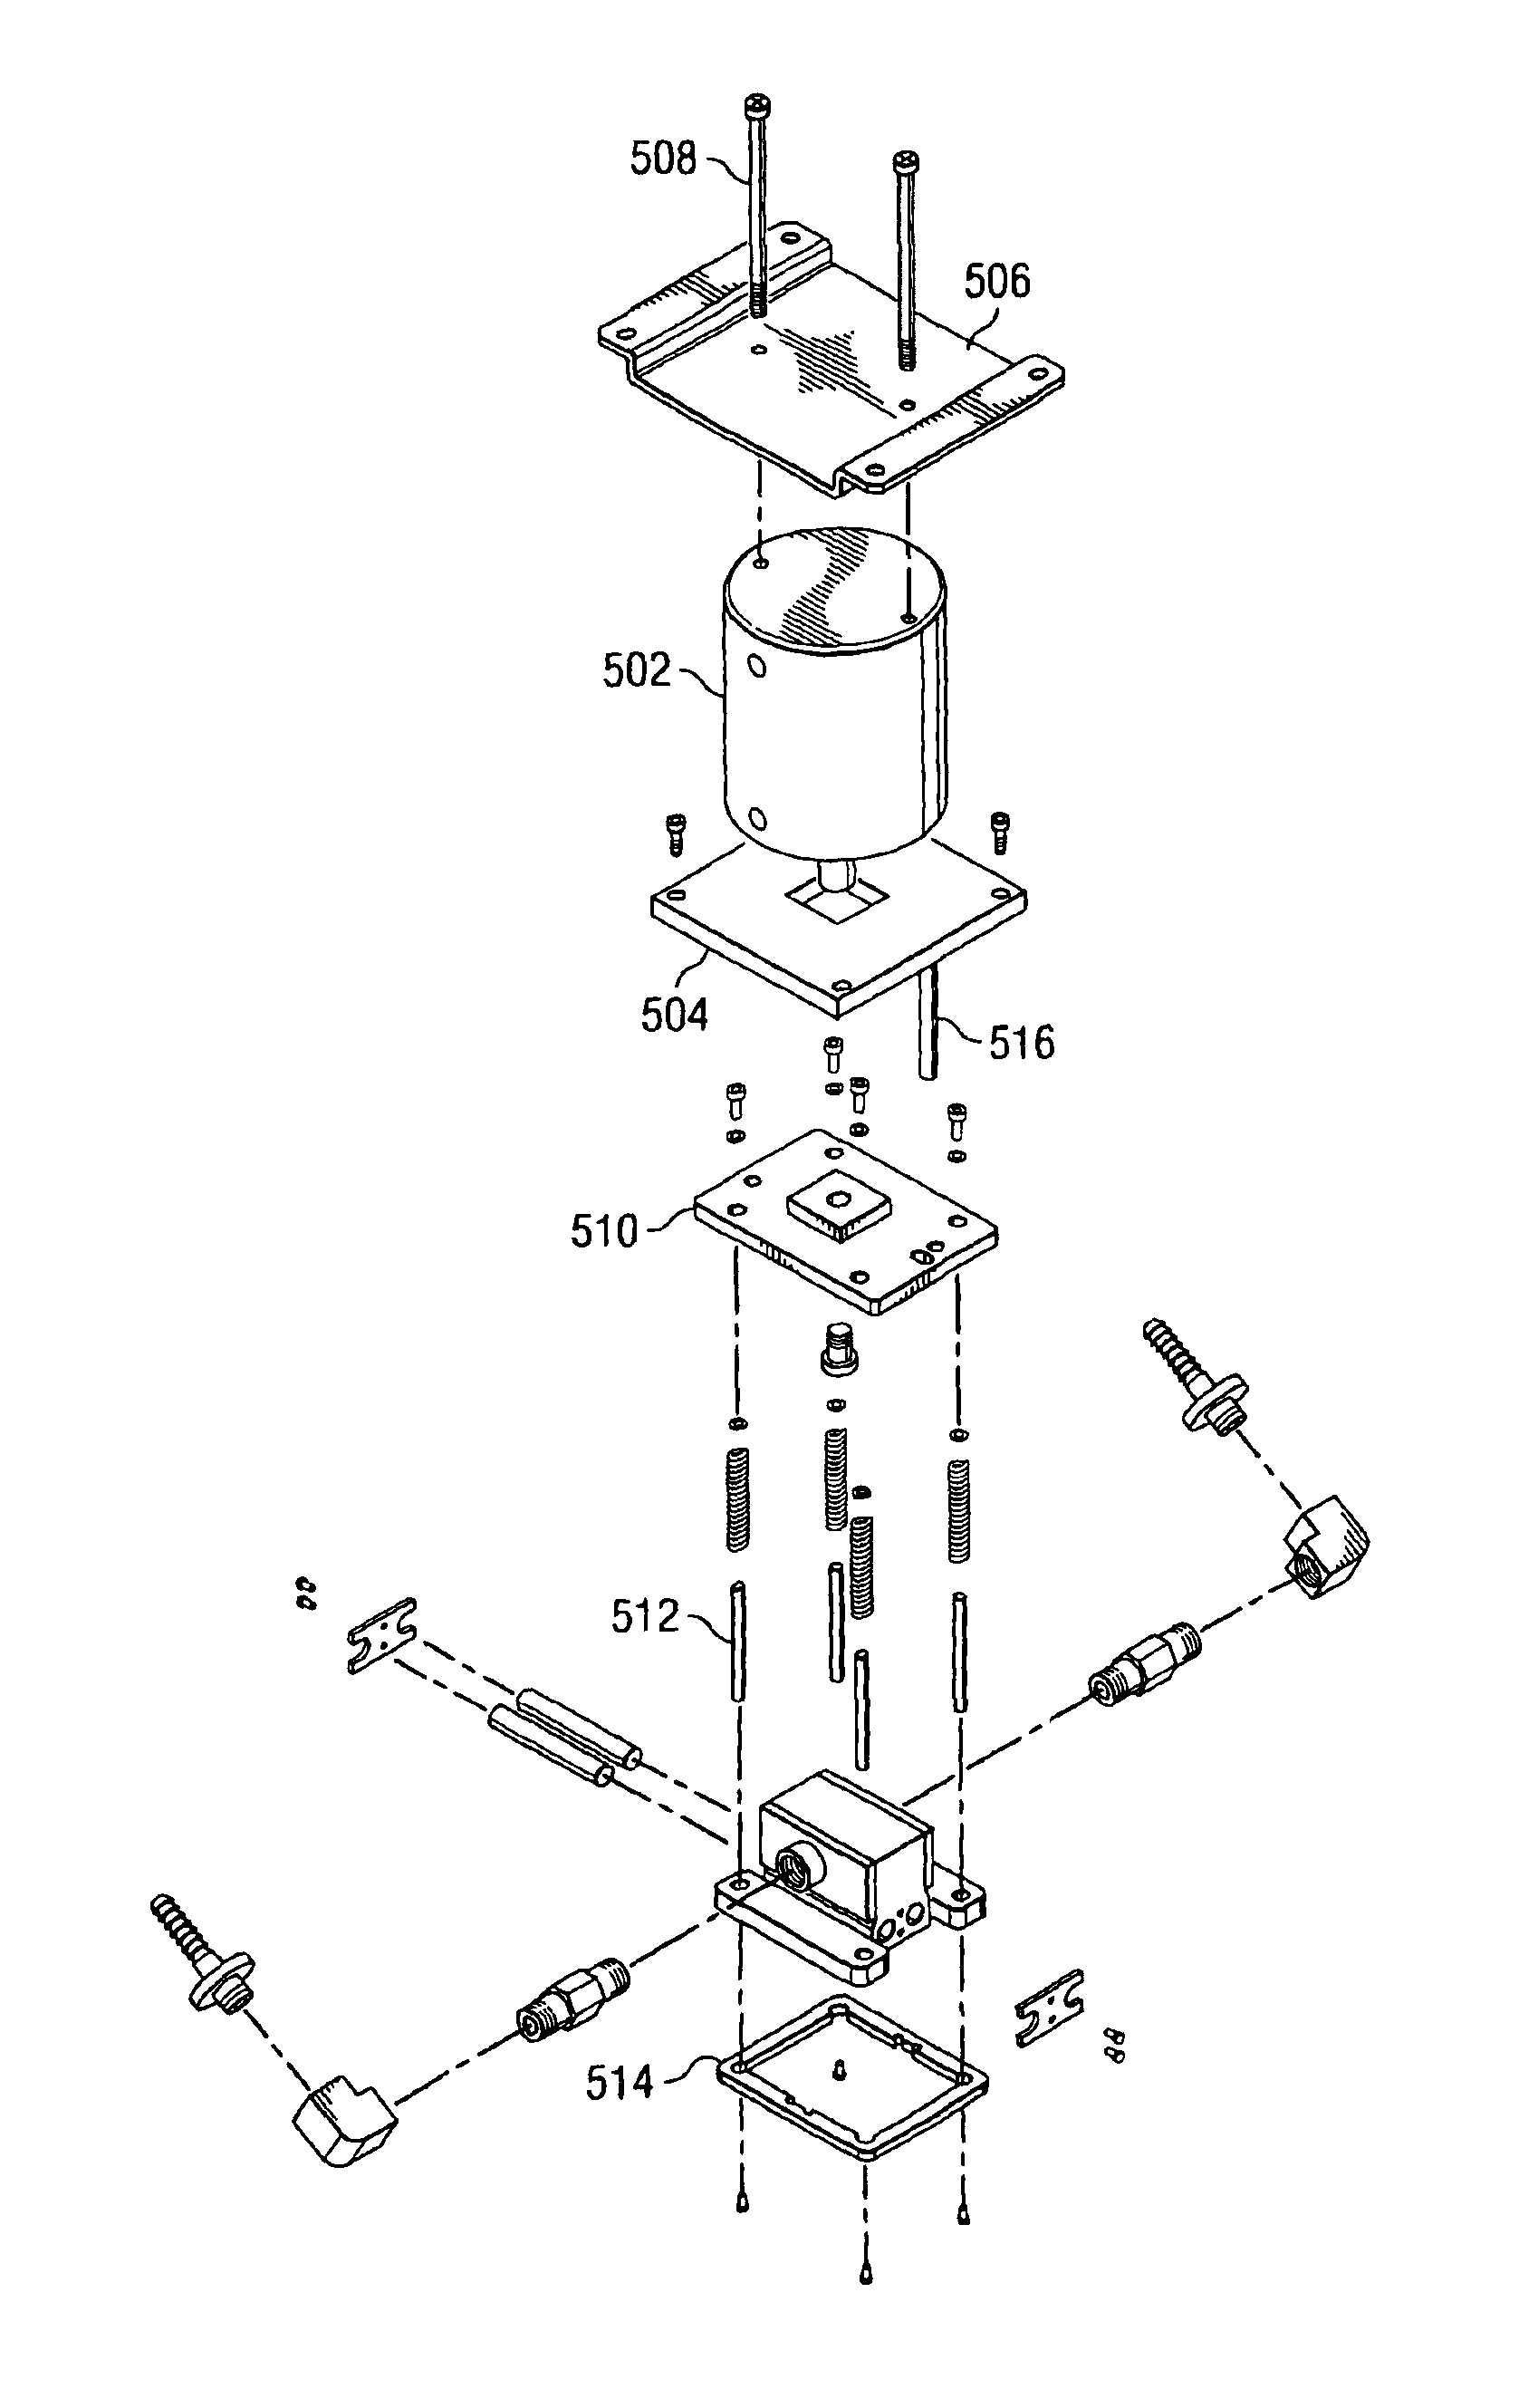 Apparatus for functional and stress testing of exposed chip land grid array devices